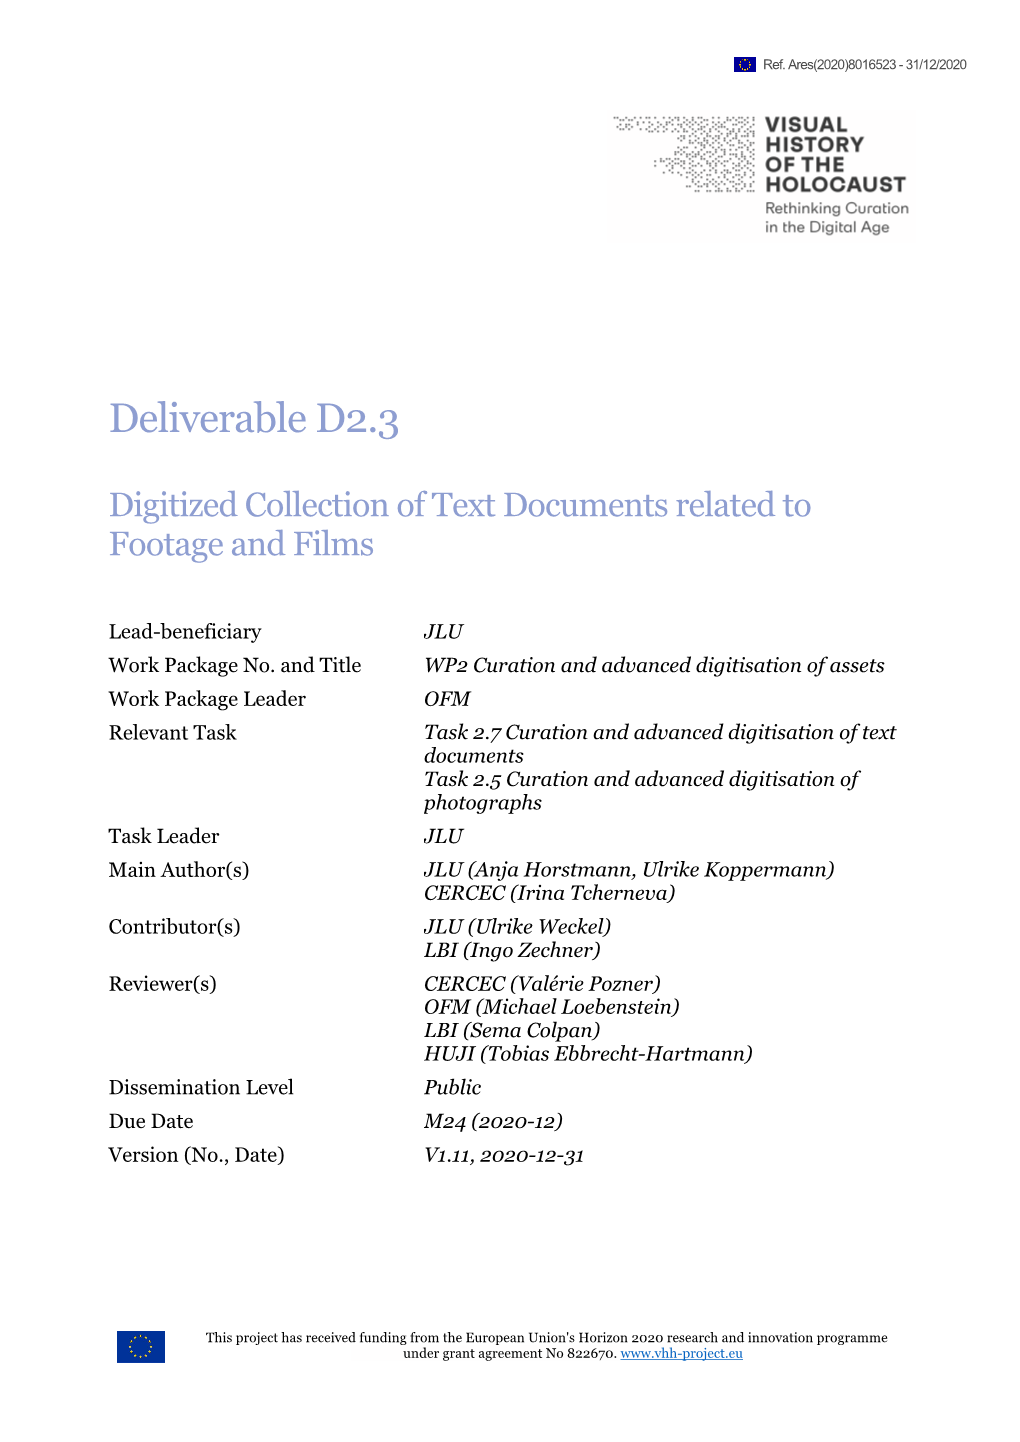 VHH Deliverable D2.3 Digitized Collection of Text Documents